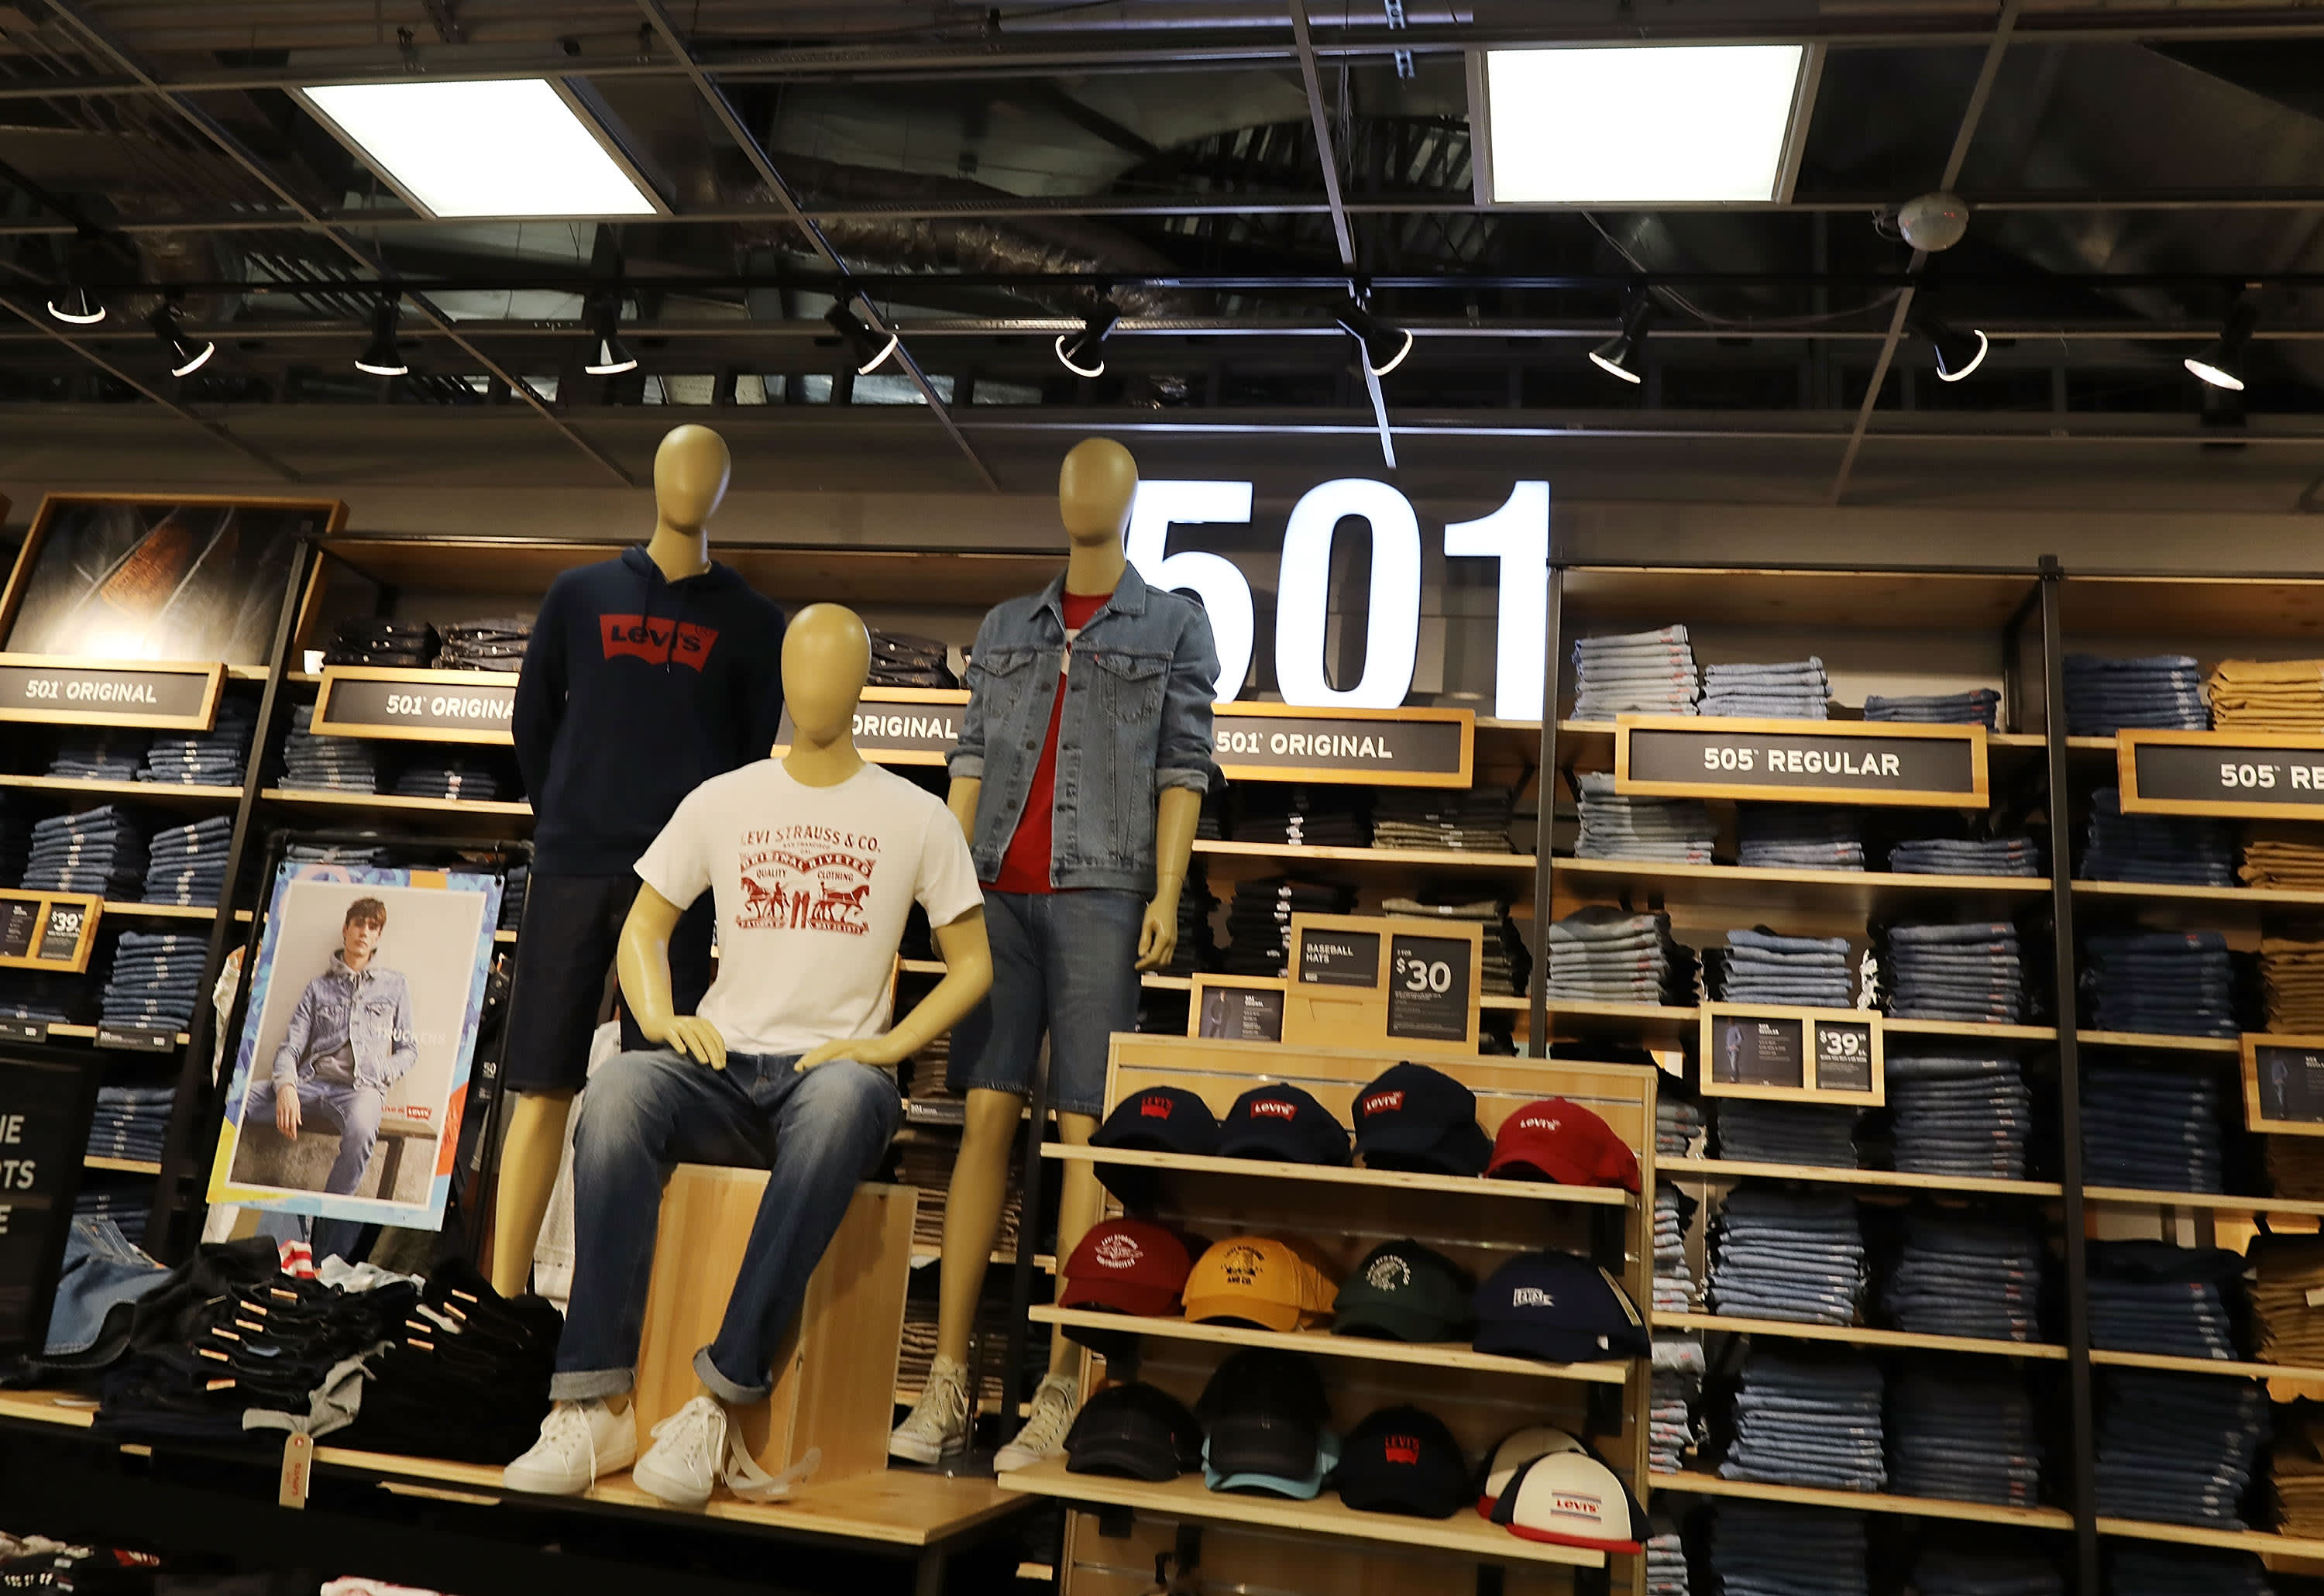 levi's store usa online